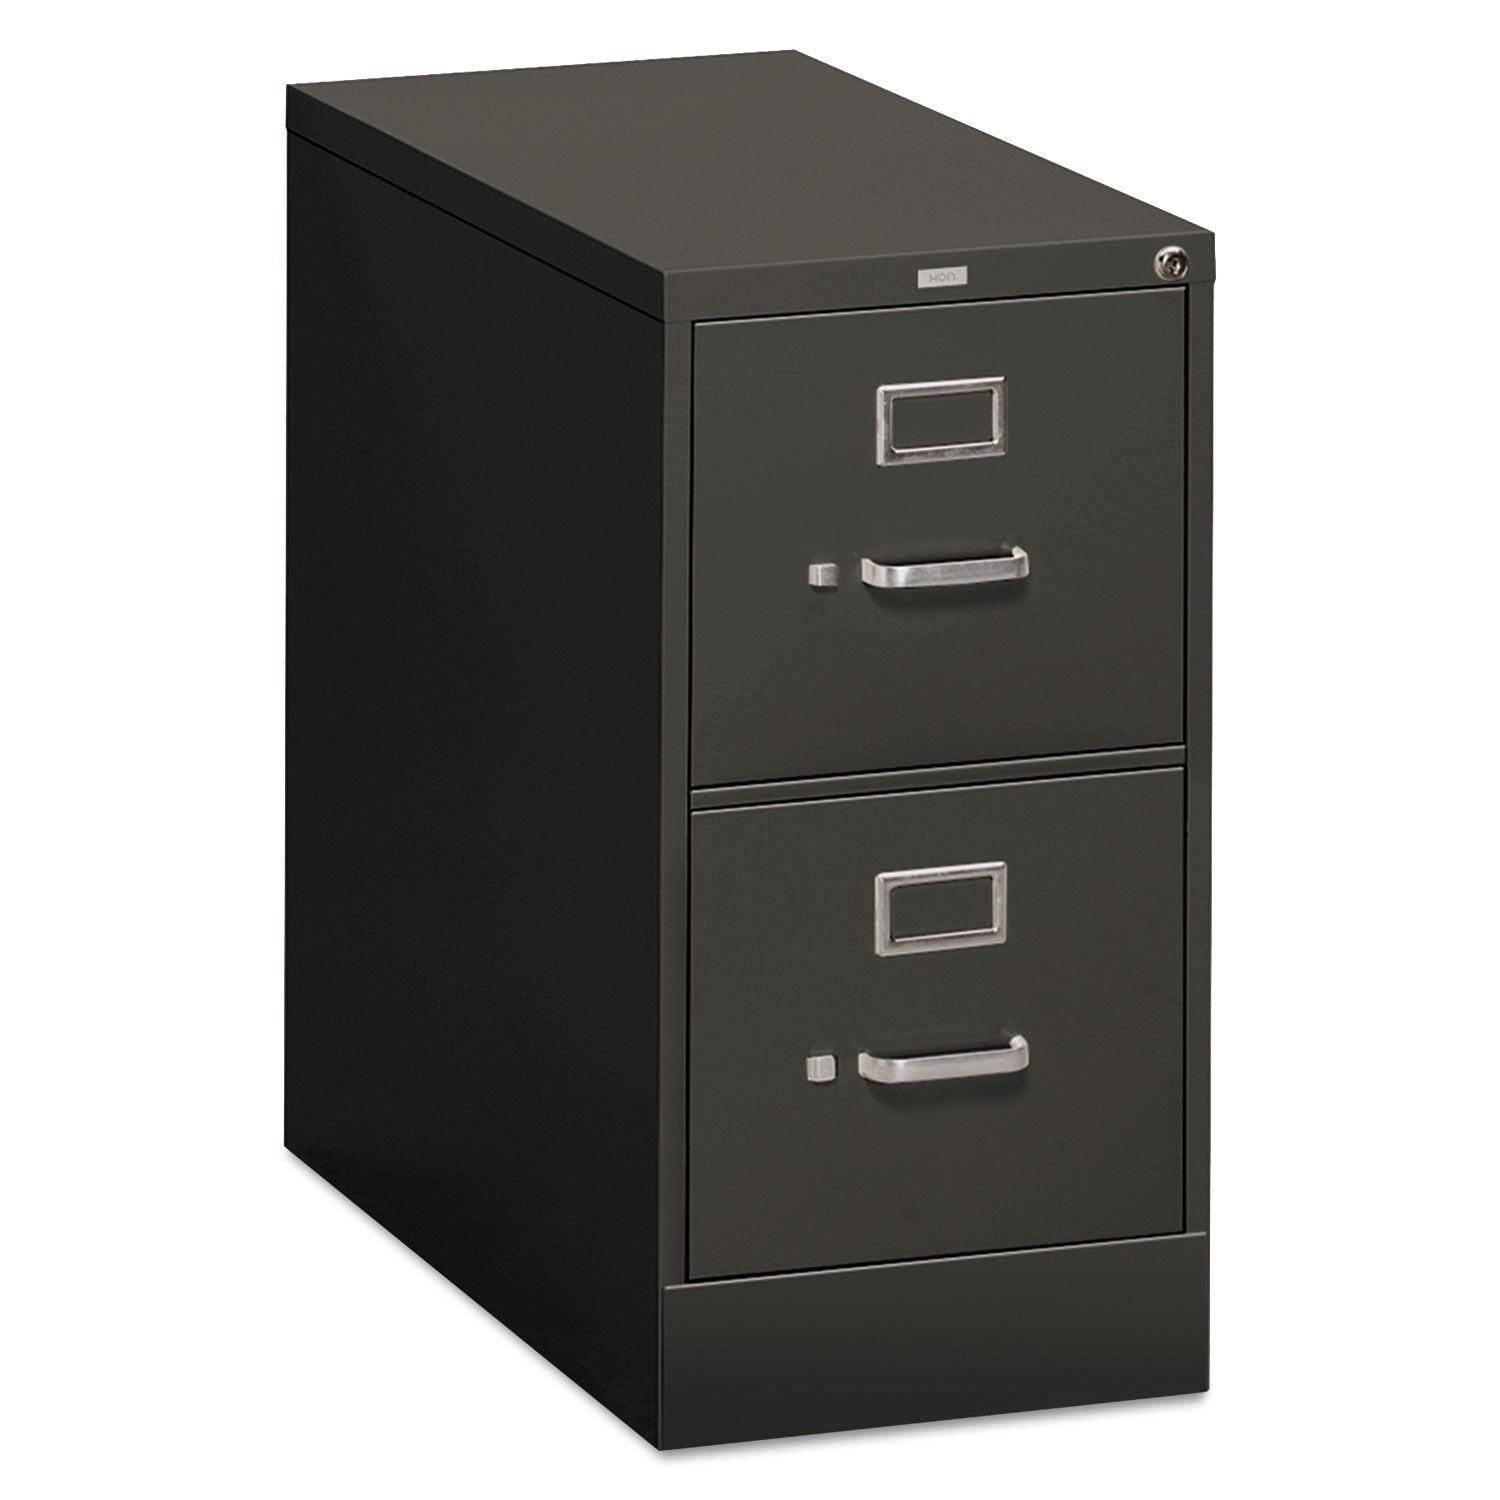 310 Series Vertical File, 2 Letter-Size File Drawers, Charcoal, 15" x 26.5" x 29 - 